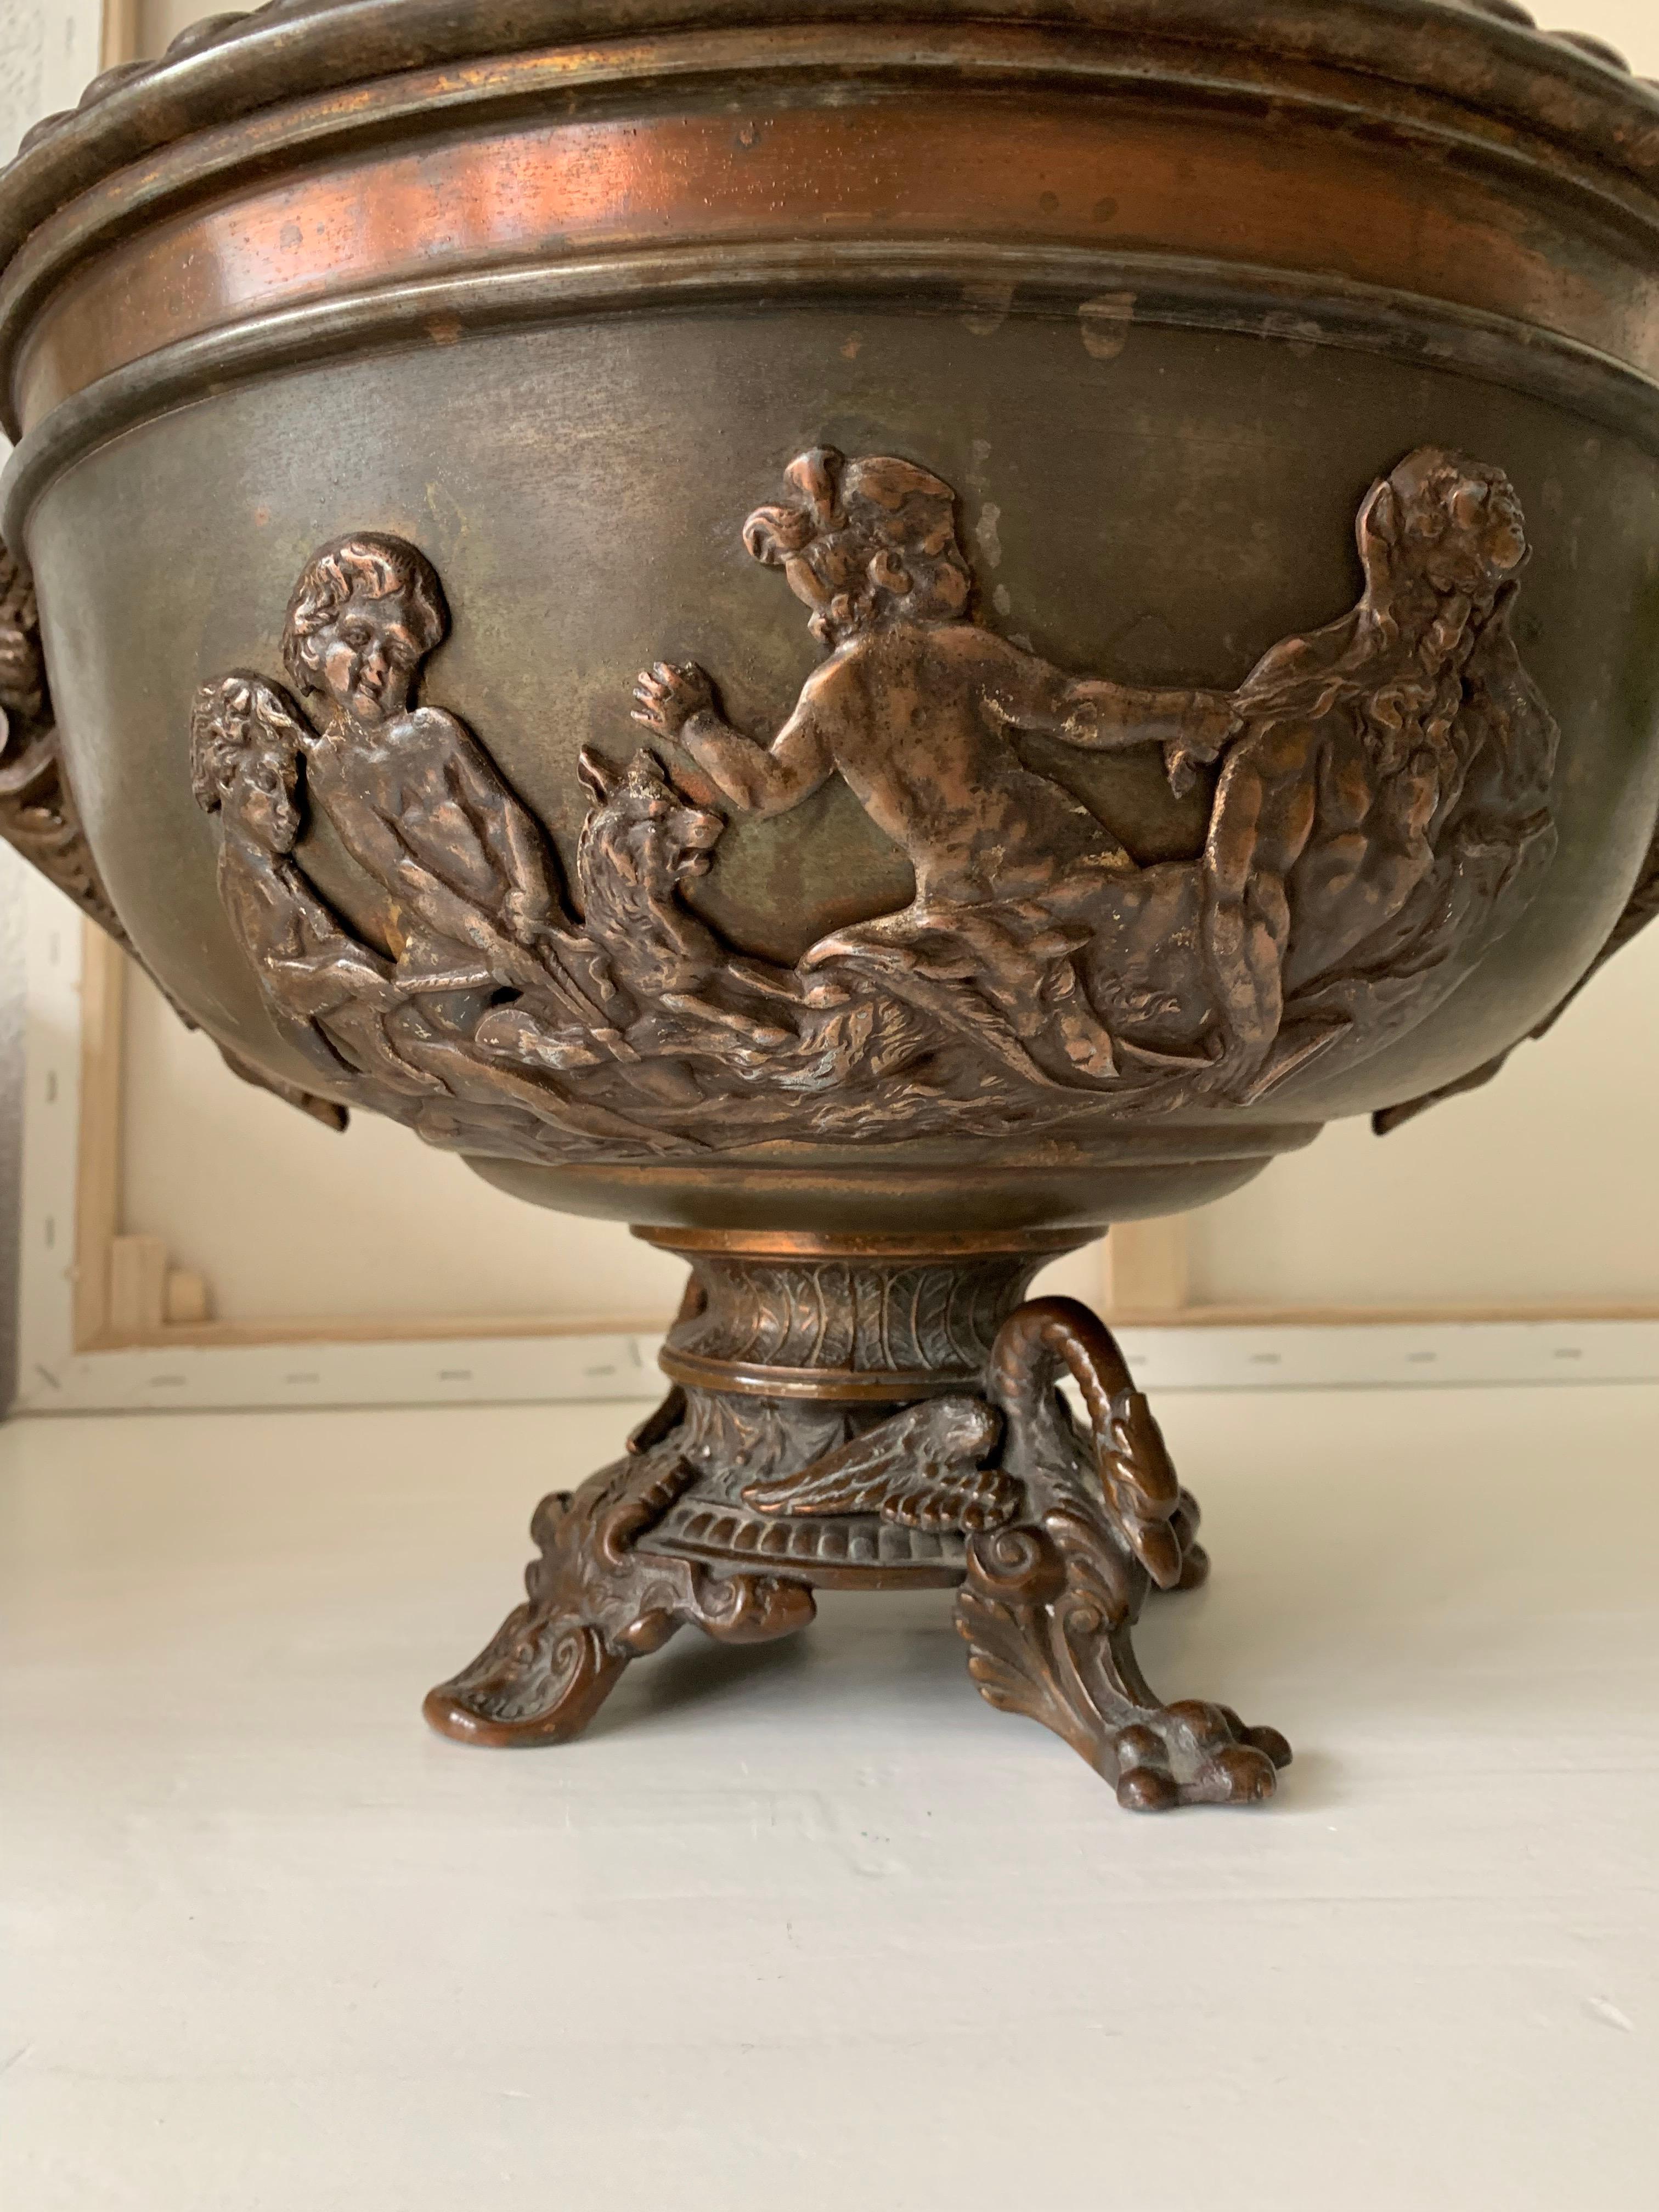 Decorative ash or coal bucket with fauns, putti and various mythological creatures.

If you are a collector of rare and sculptural antiques then this possibly unique bucket could be gracing your fireplace soon. The artisan metal worker who